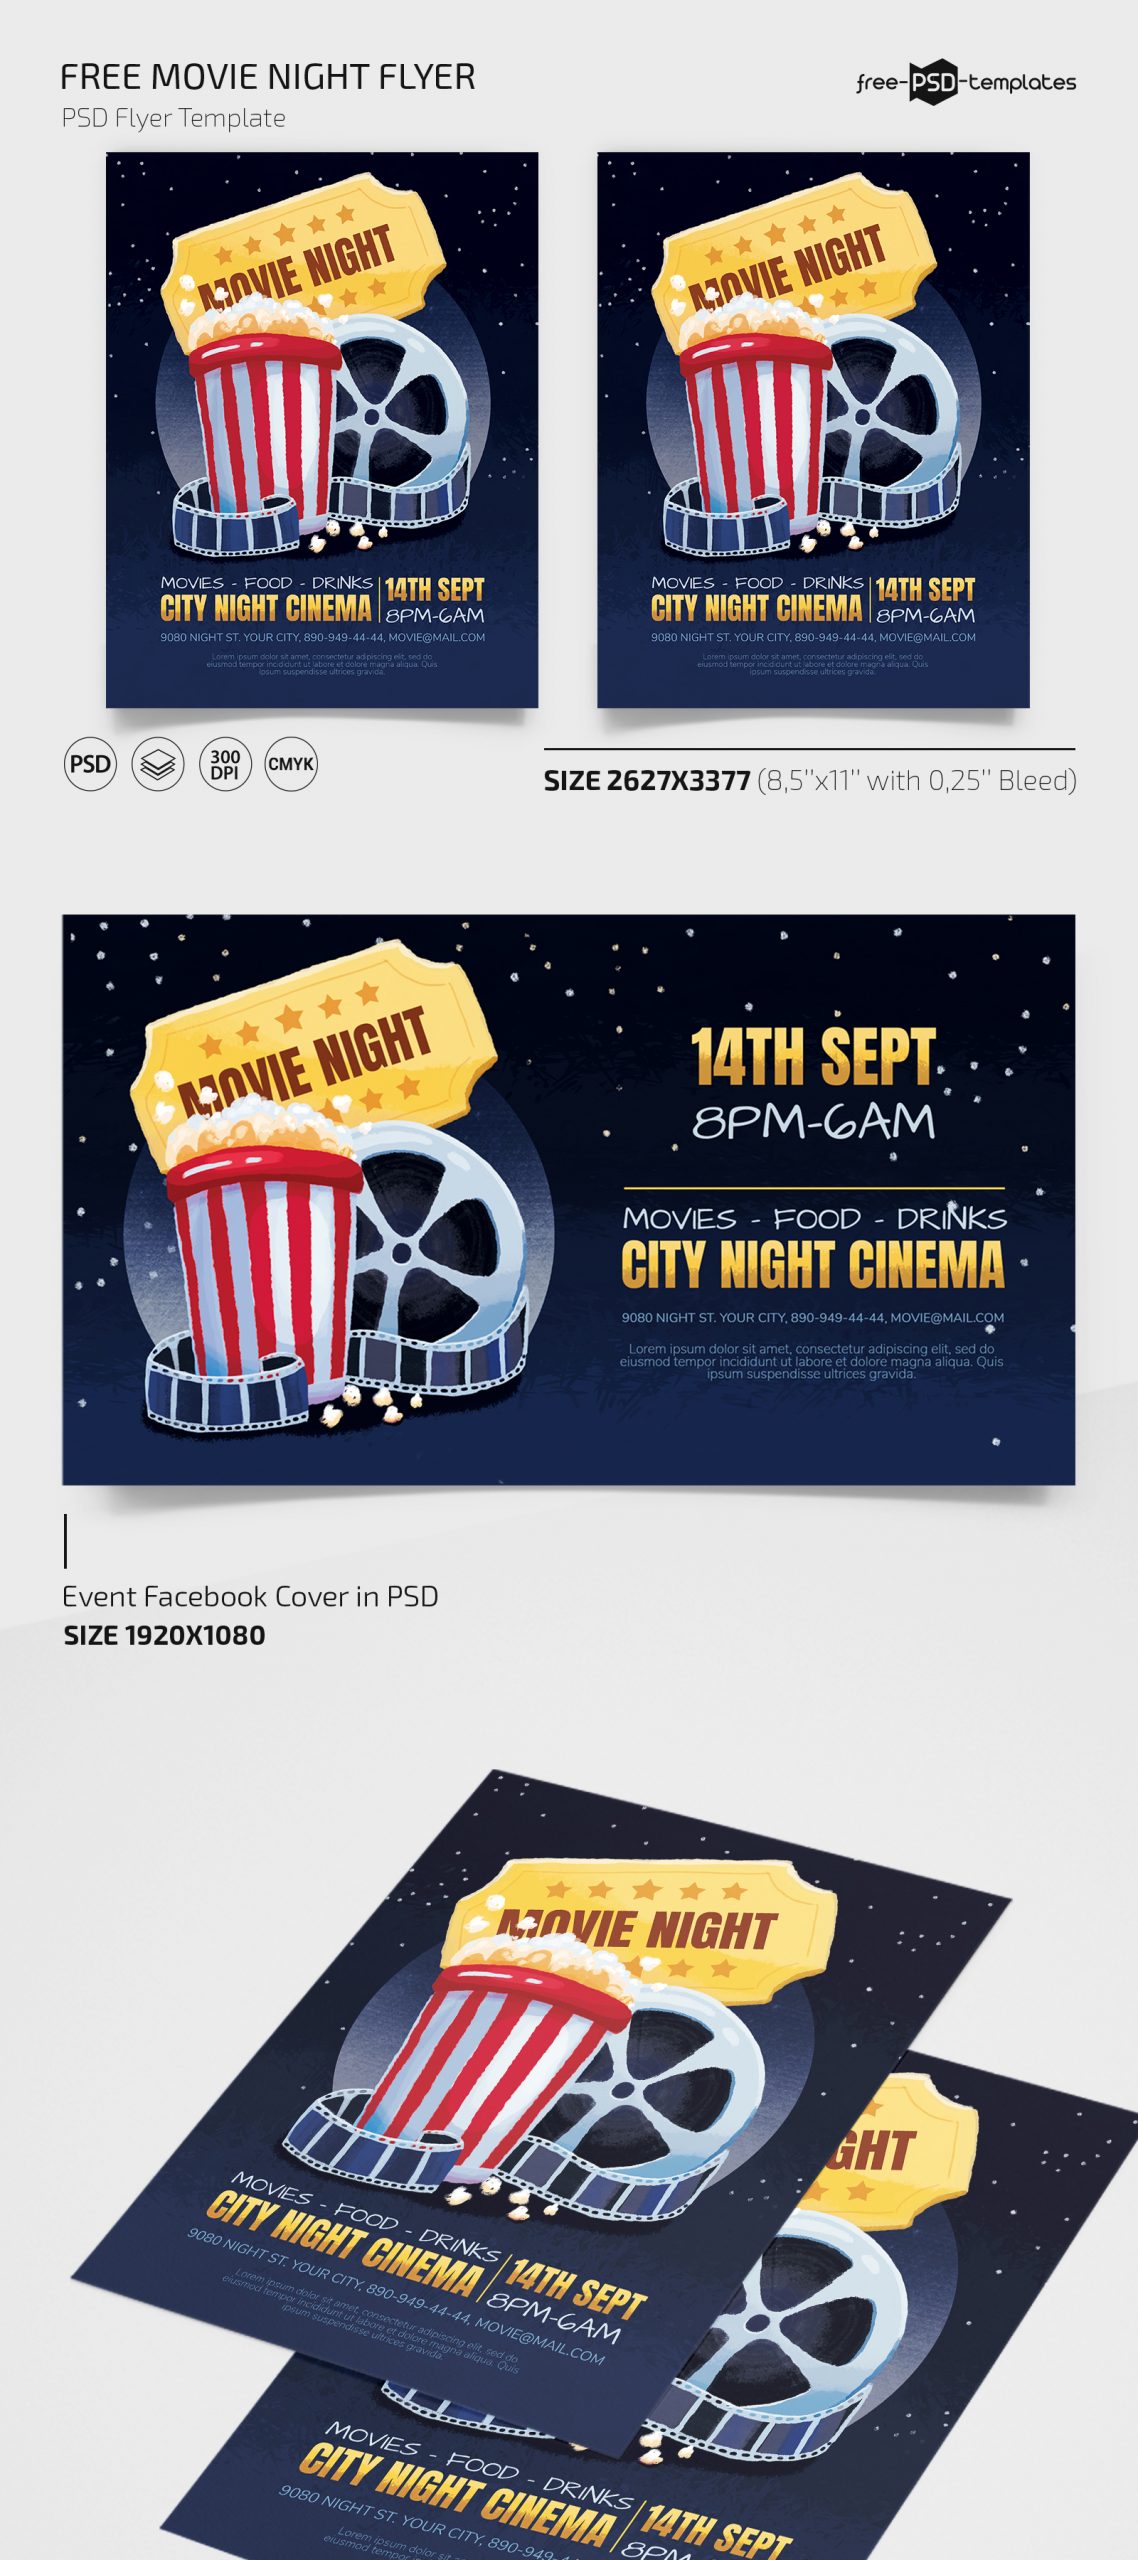 Free Movie Night Flyer in PSD – Free PSD Templates